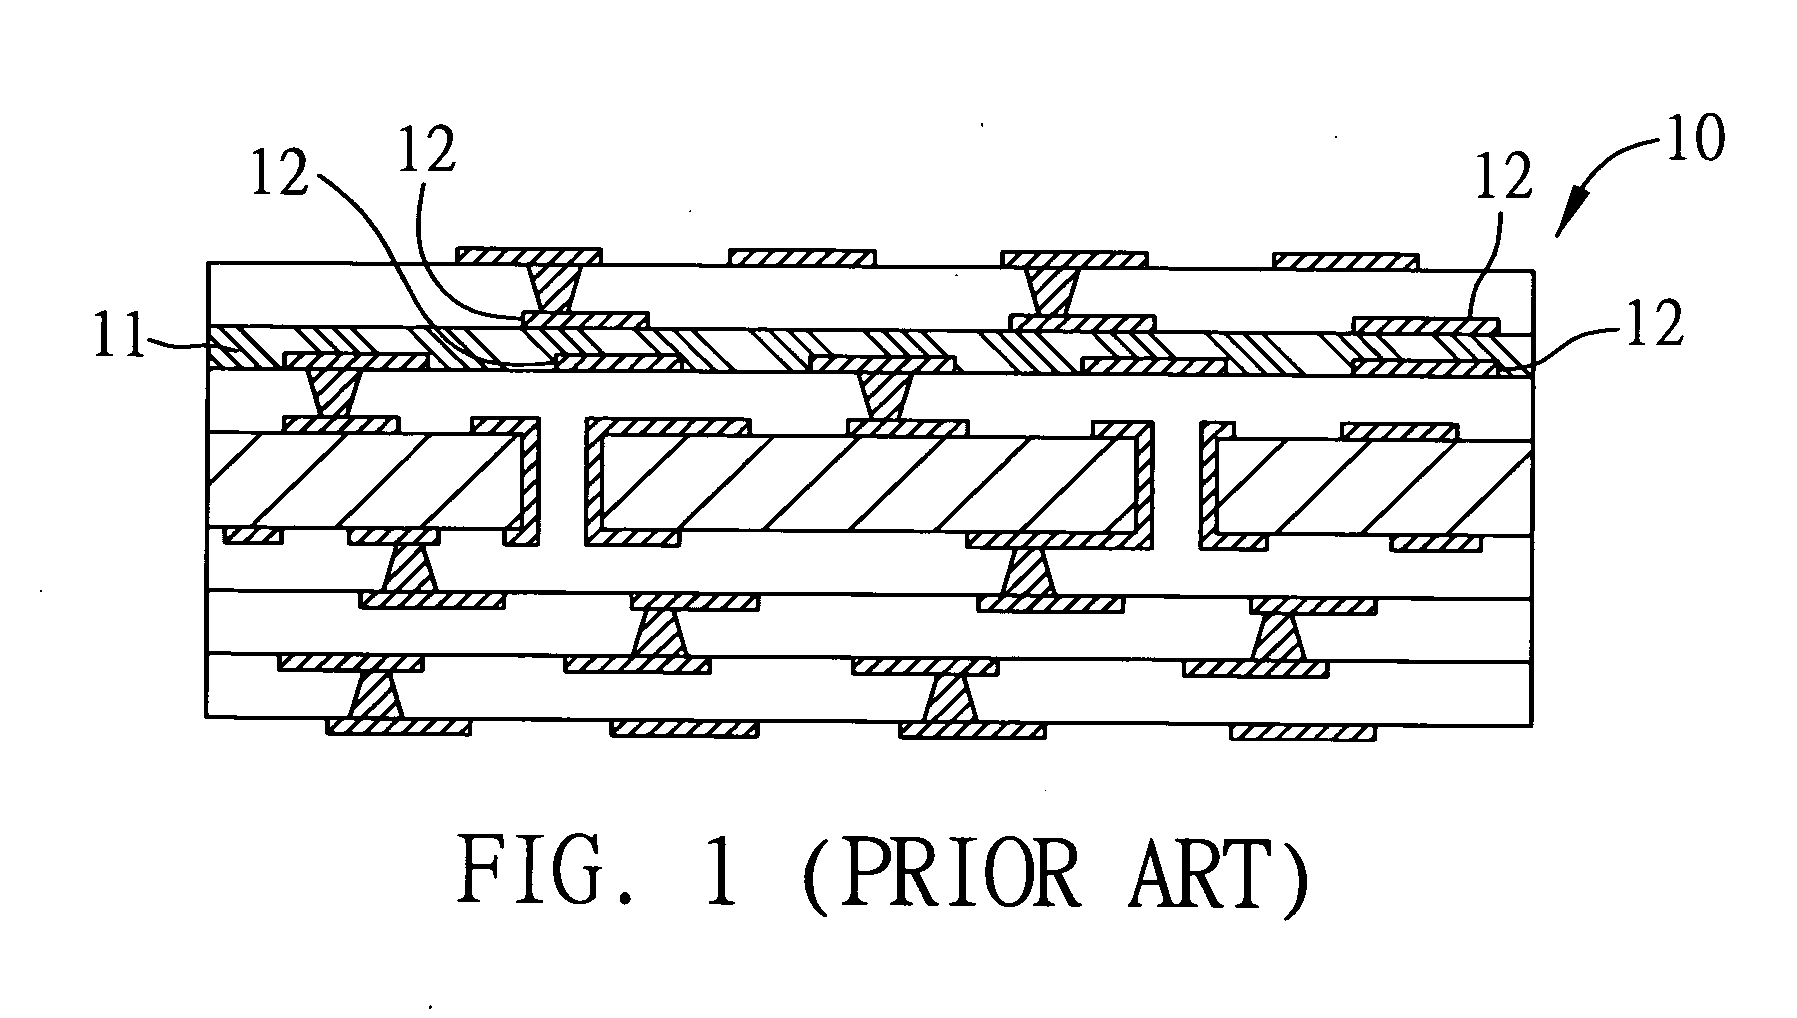 Embedded capacitor structure in circuit board and method for fabricating the same